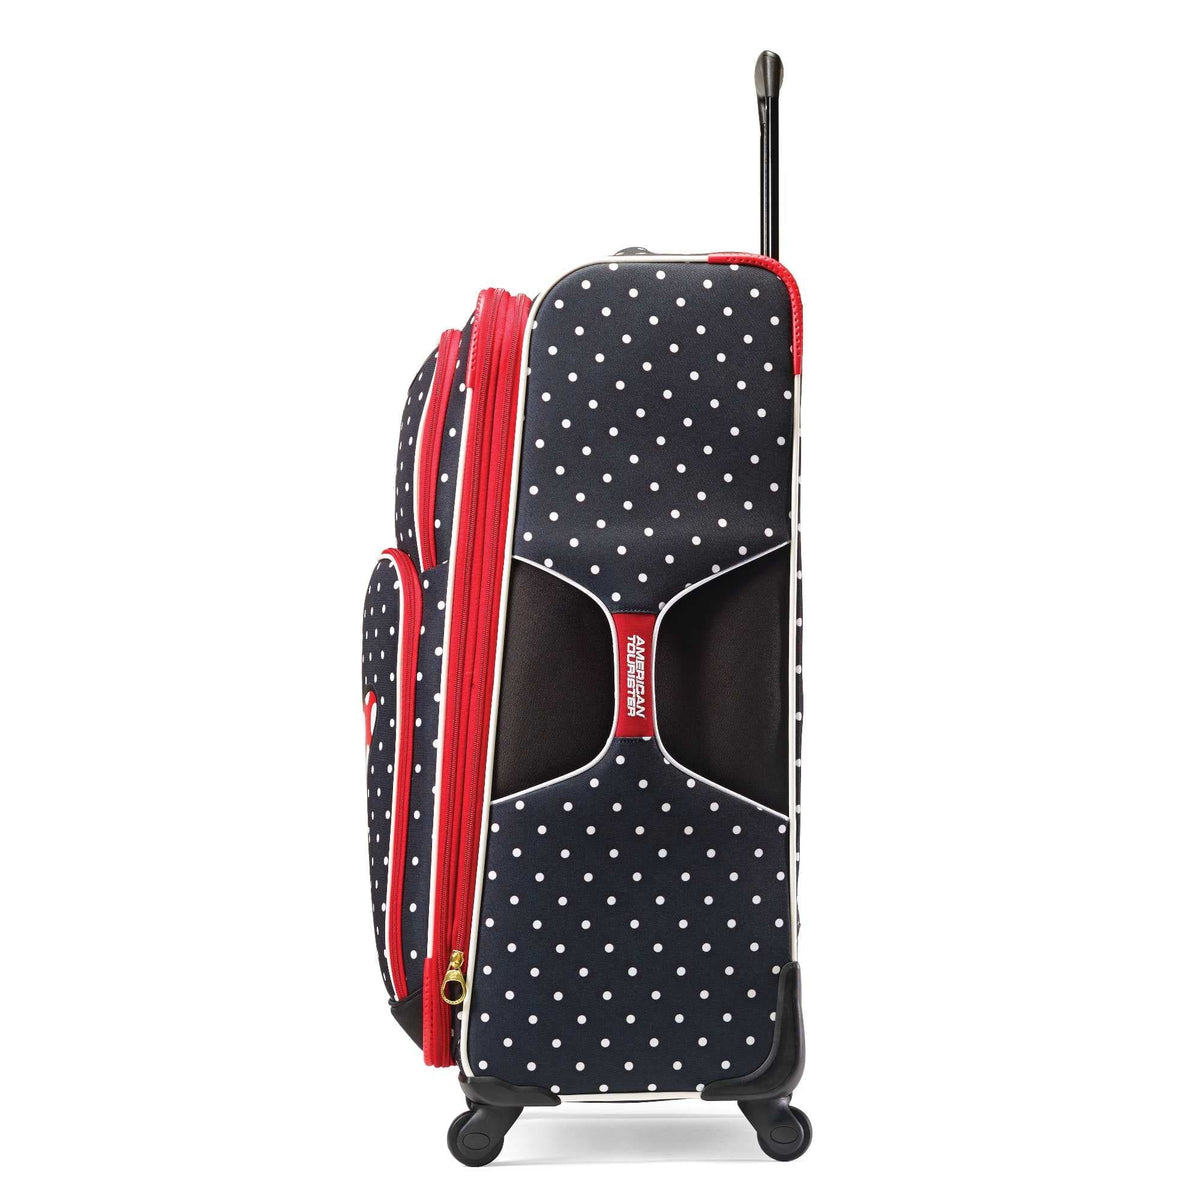 American Tourister Disney 28" Softside Spinner Luggage